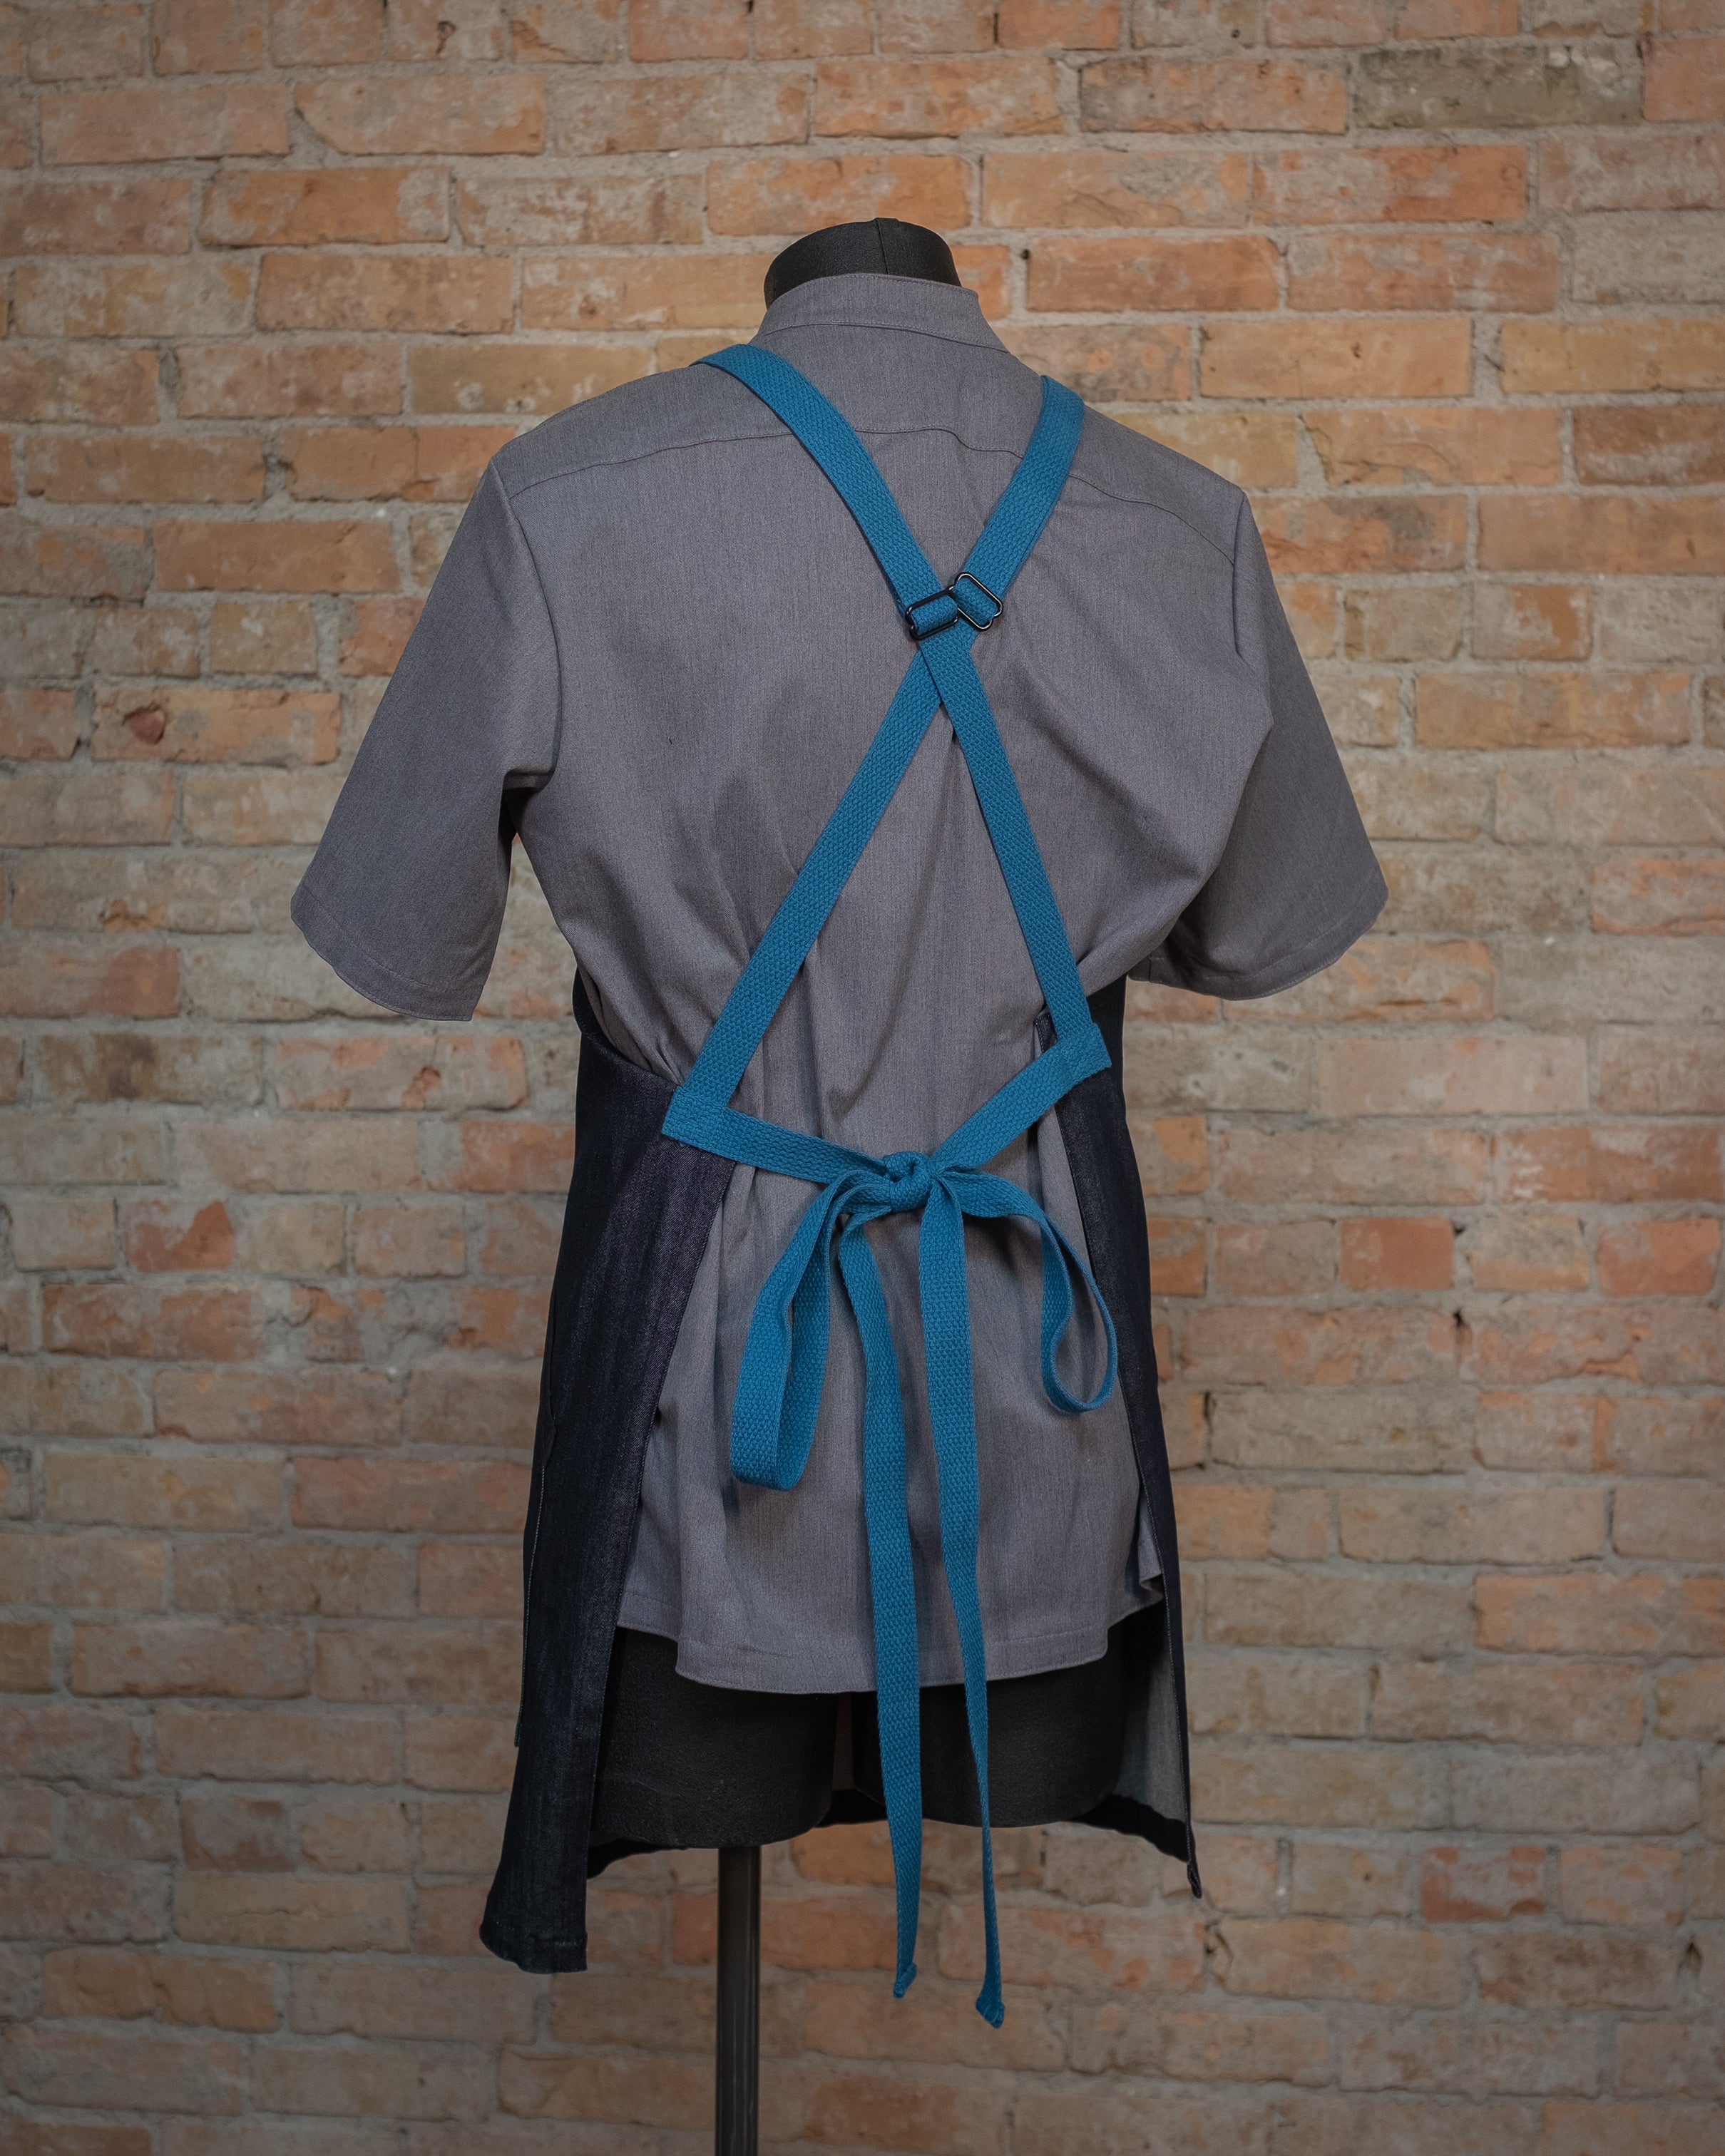 Denim crossback apron from Craftmade Aprons, Minnesota, displayed on a mannequin over a gray chef coat. The apron Black & Blue Denim is shown from the back, revealing the signature blue crossback strapping.